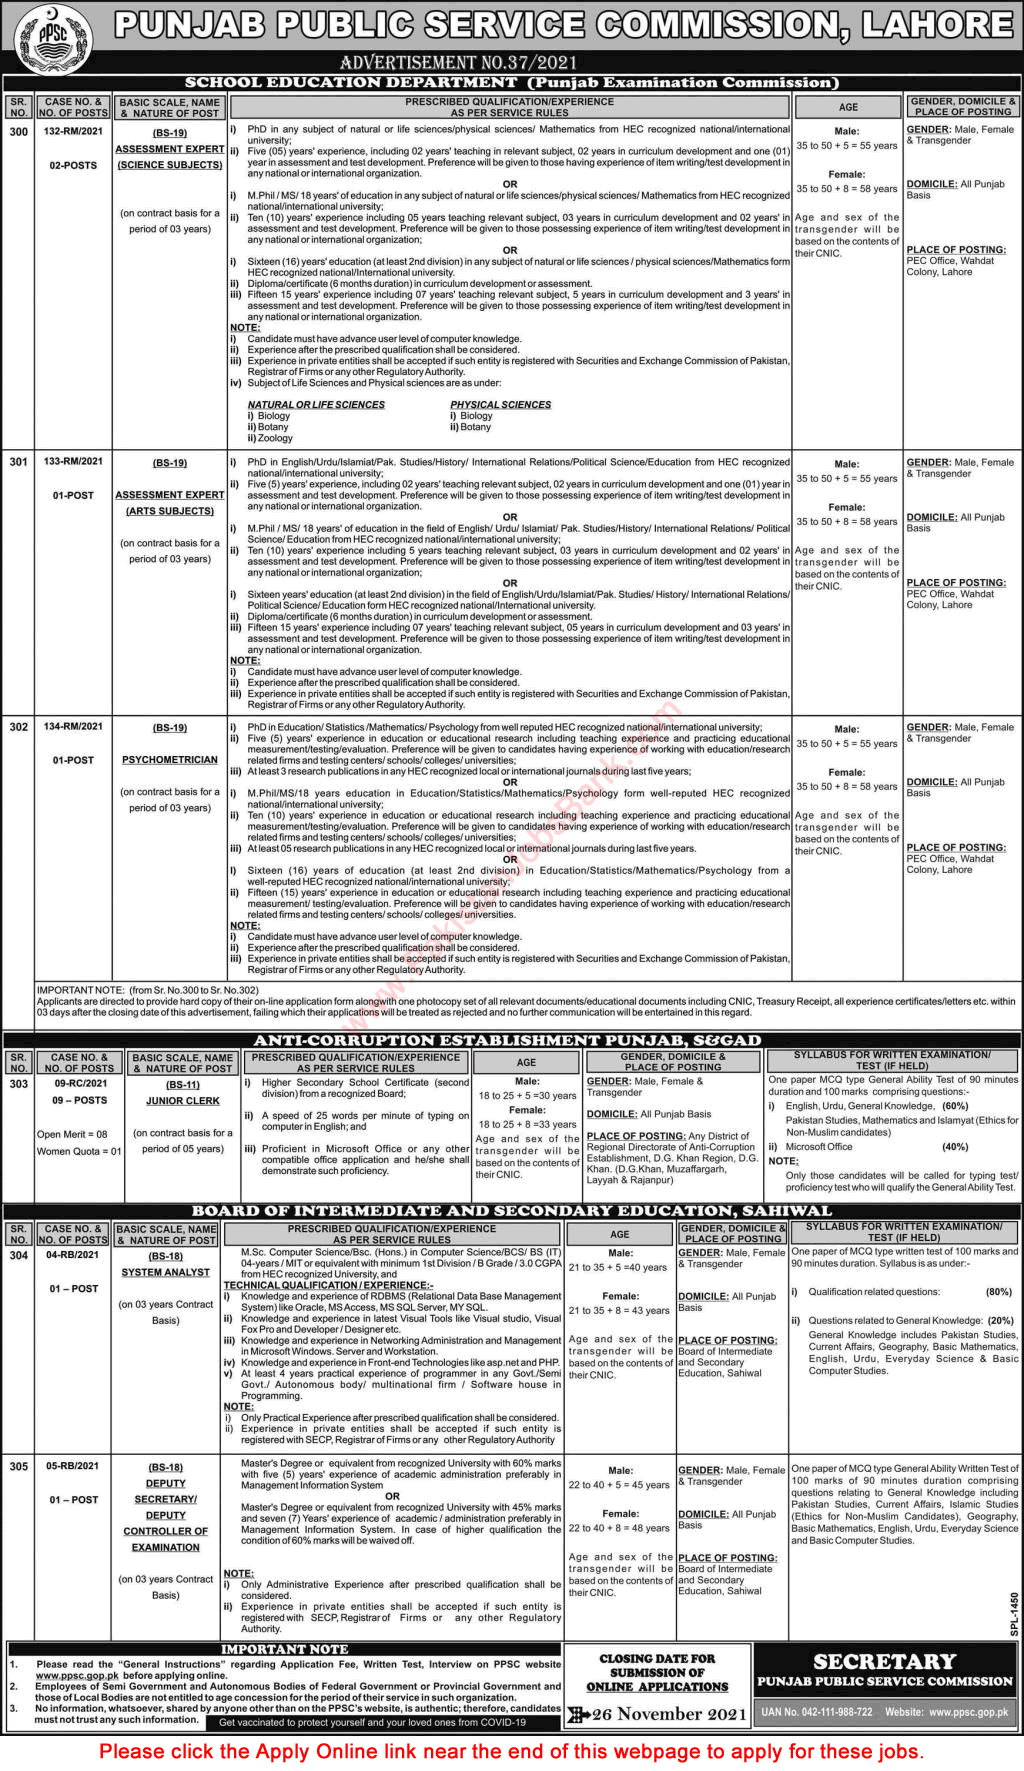 PPSC Jobs November 2021 Online Apply Consolidated Advertisement No 37/2021 Latest